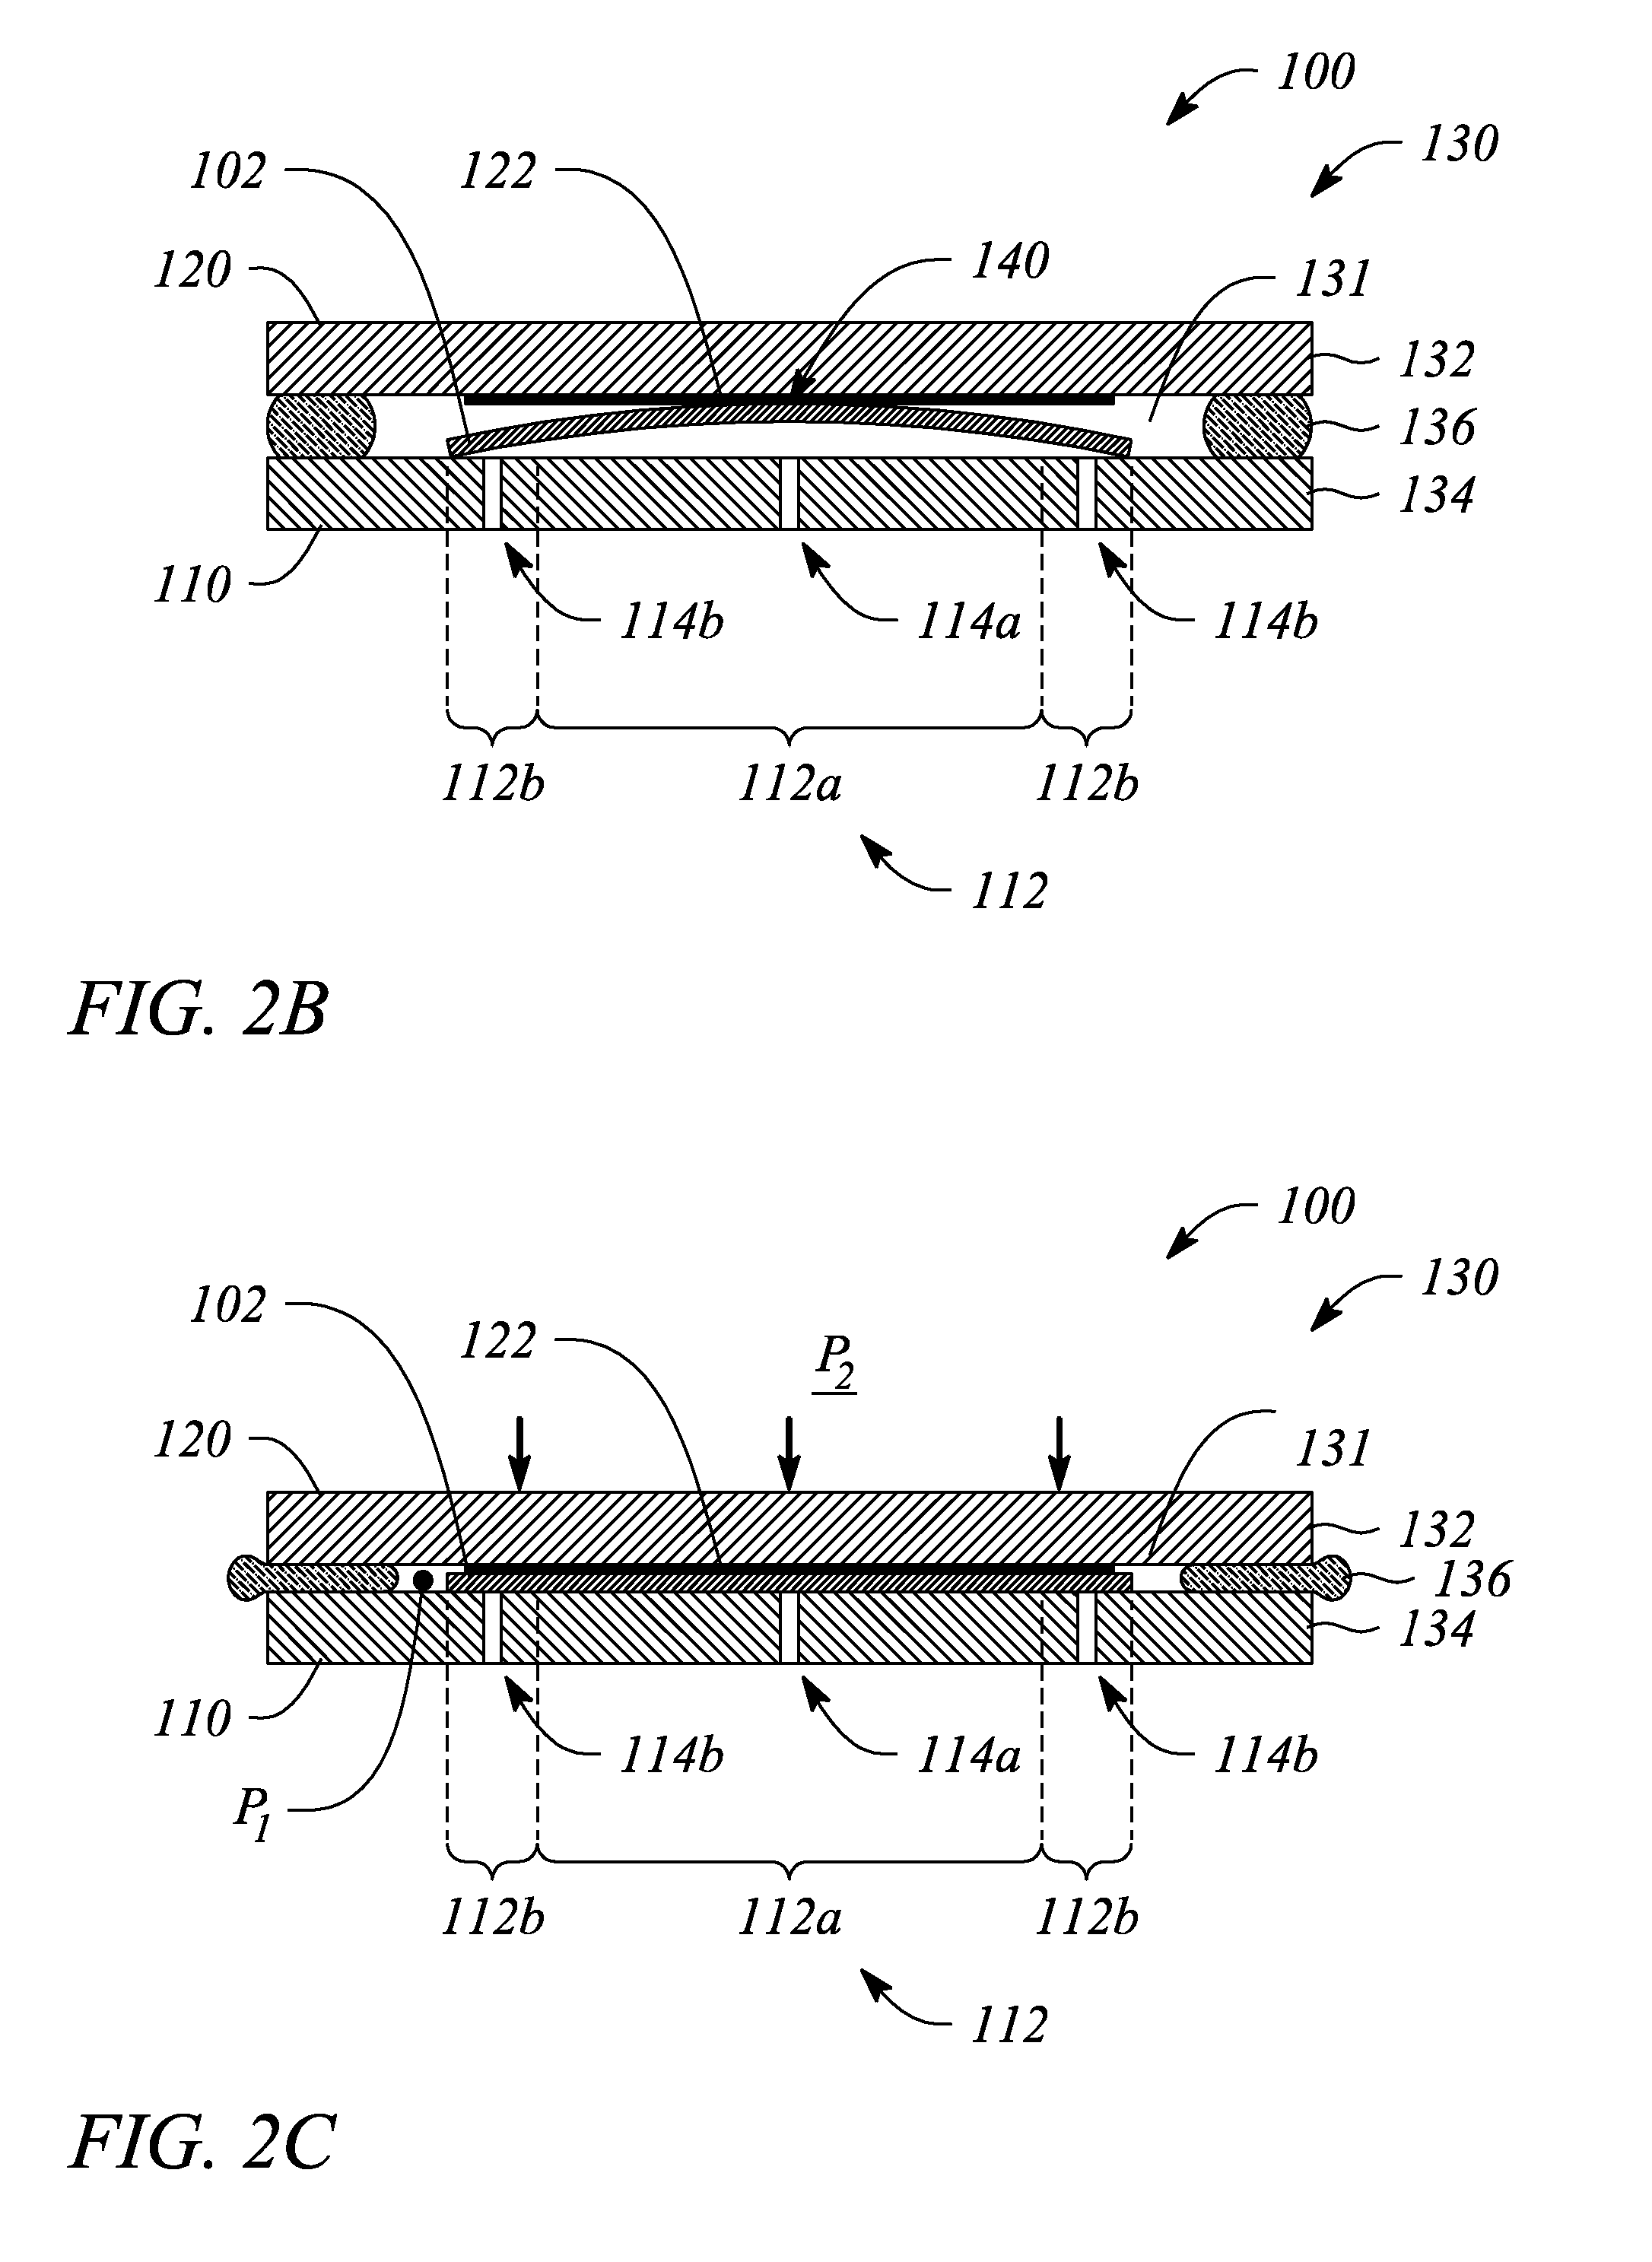 Contact lithography apparatus and method employing substrate deformation